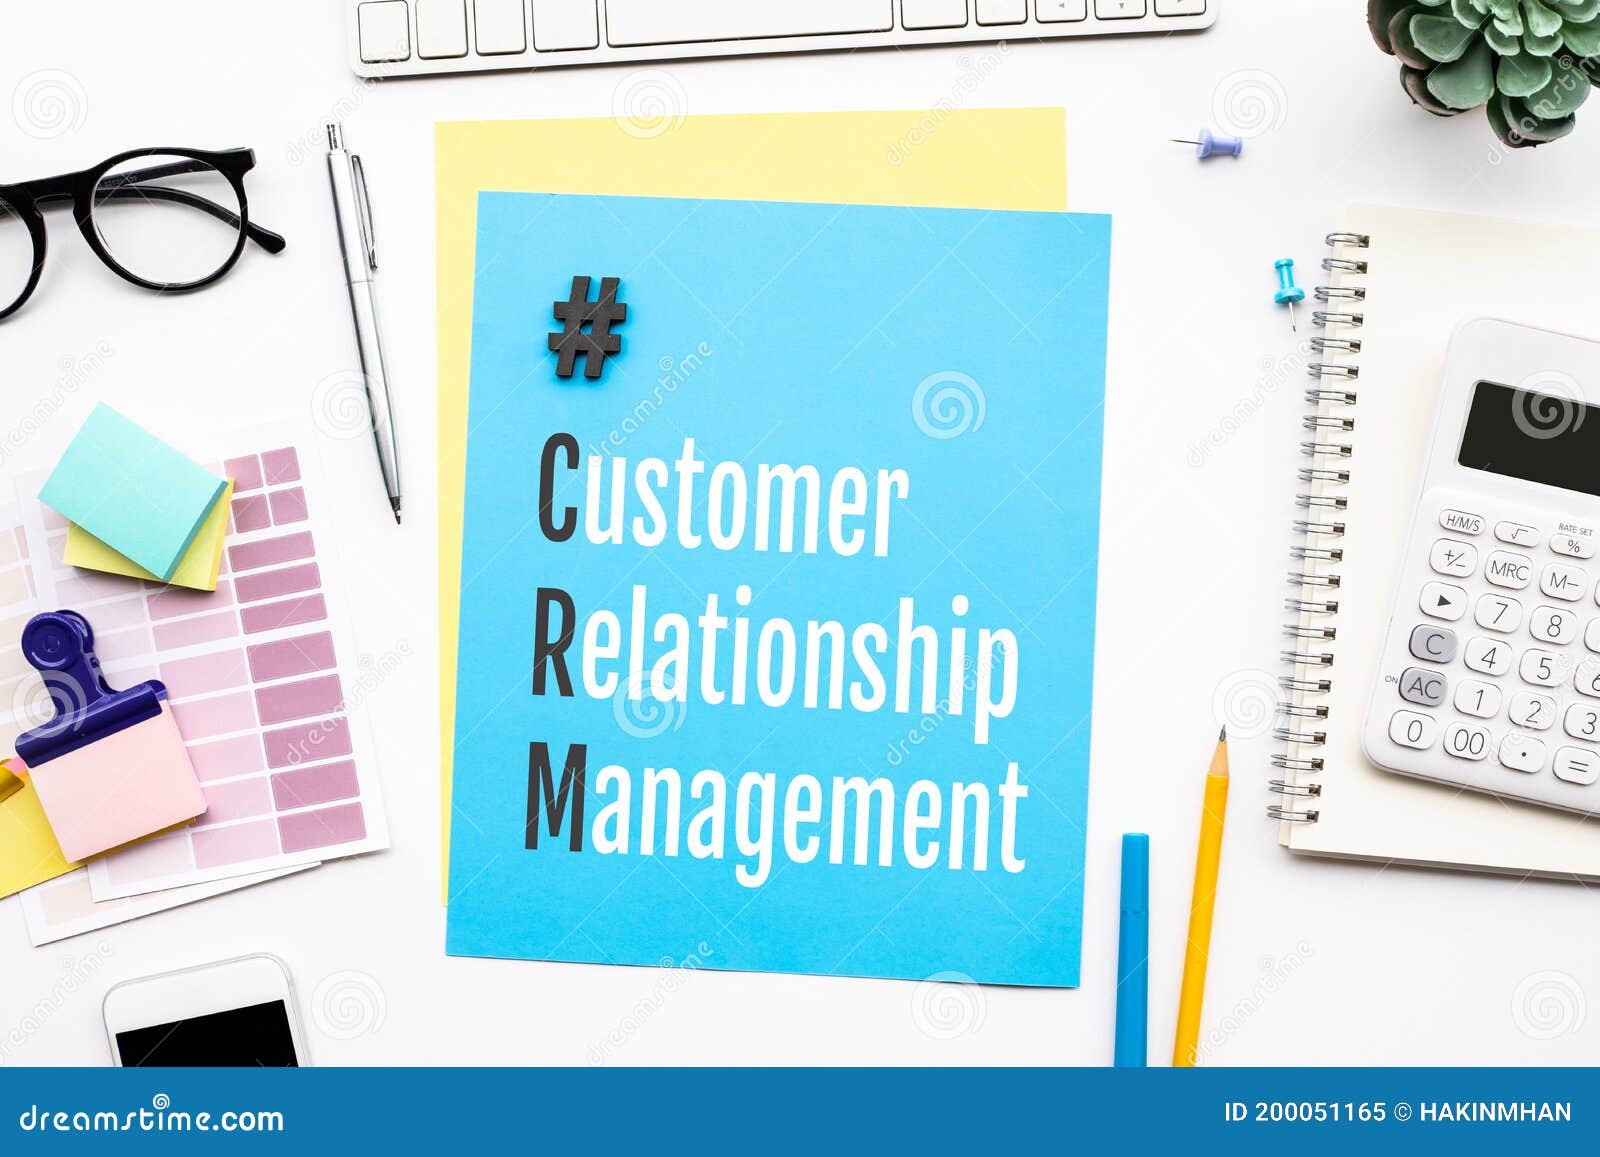 CRM,customer Relationship Management Concepts with Text on Desk Stock